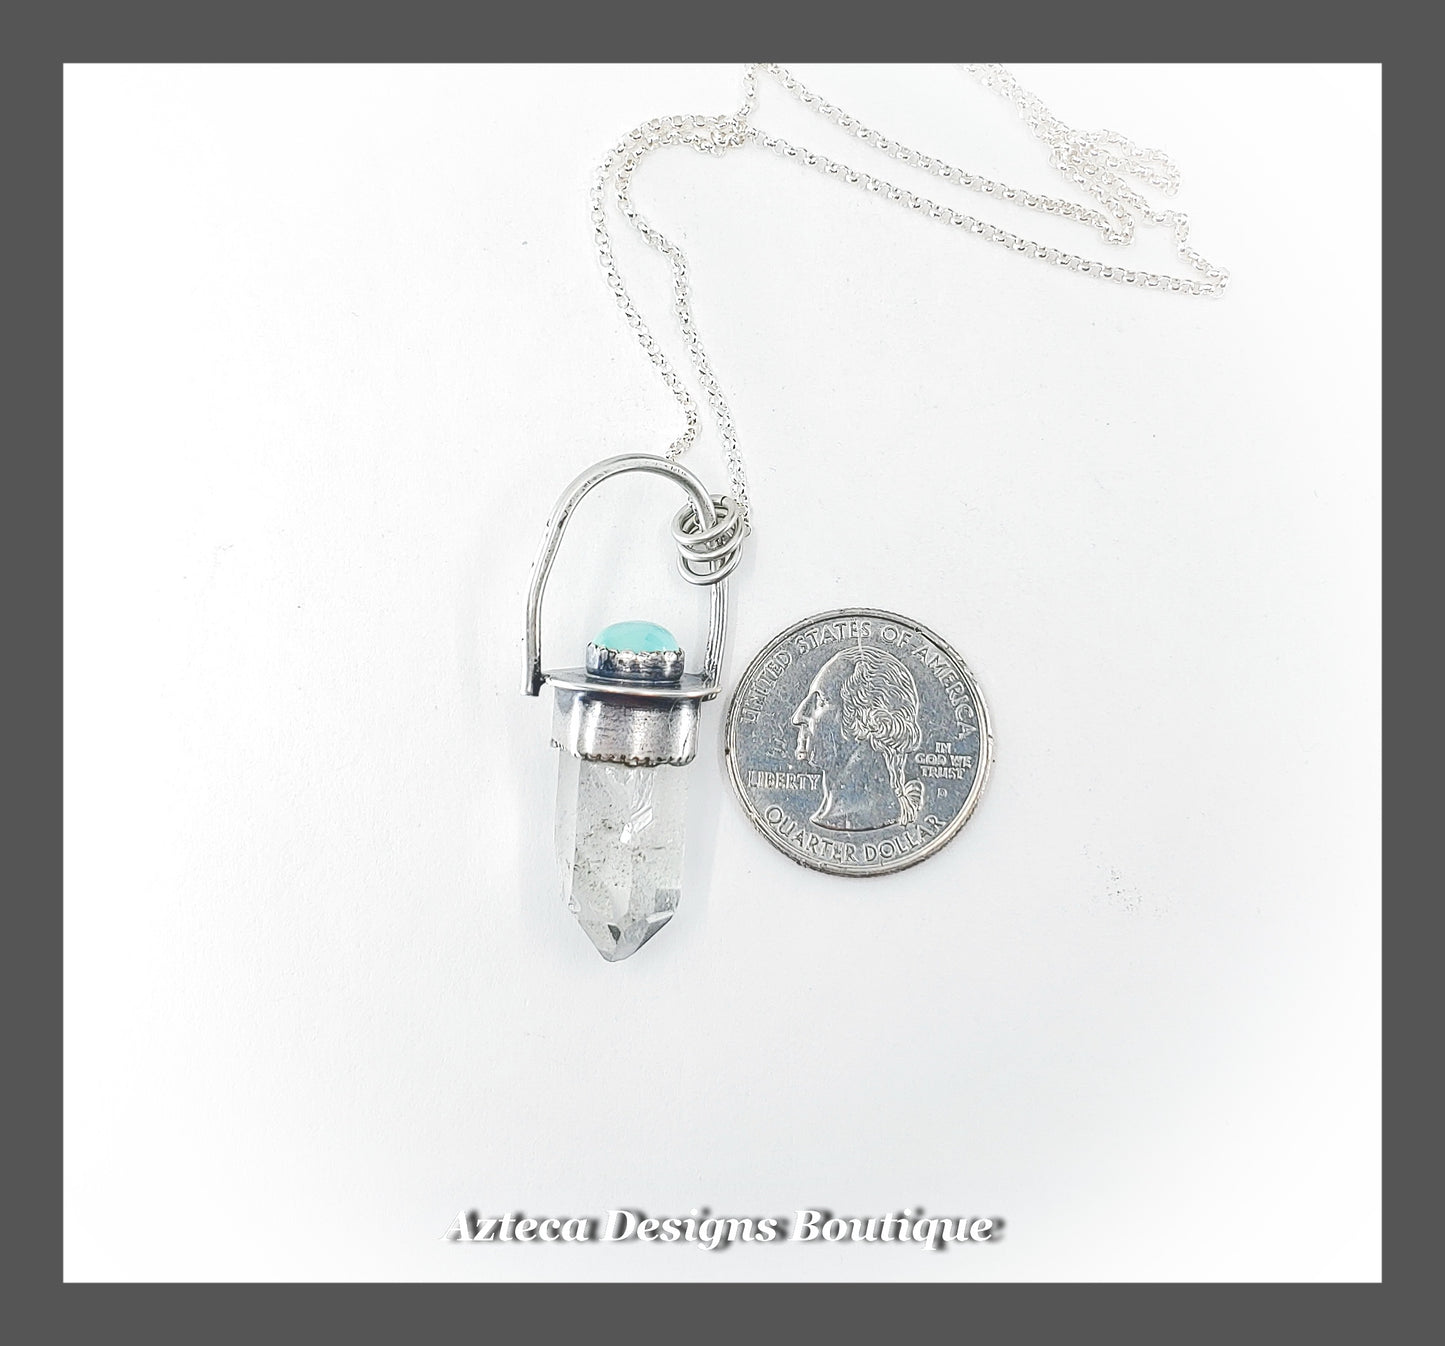 Clear Quartz Crystal + Turquoise + Hand Fabricated Sterling Silver Necklace